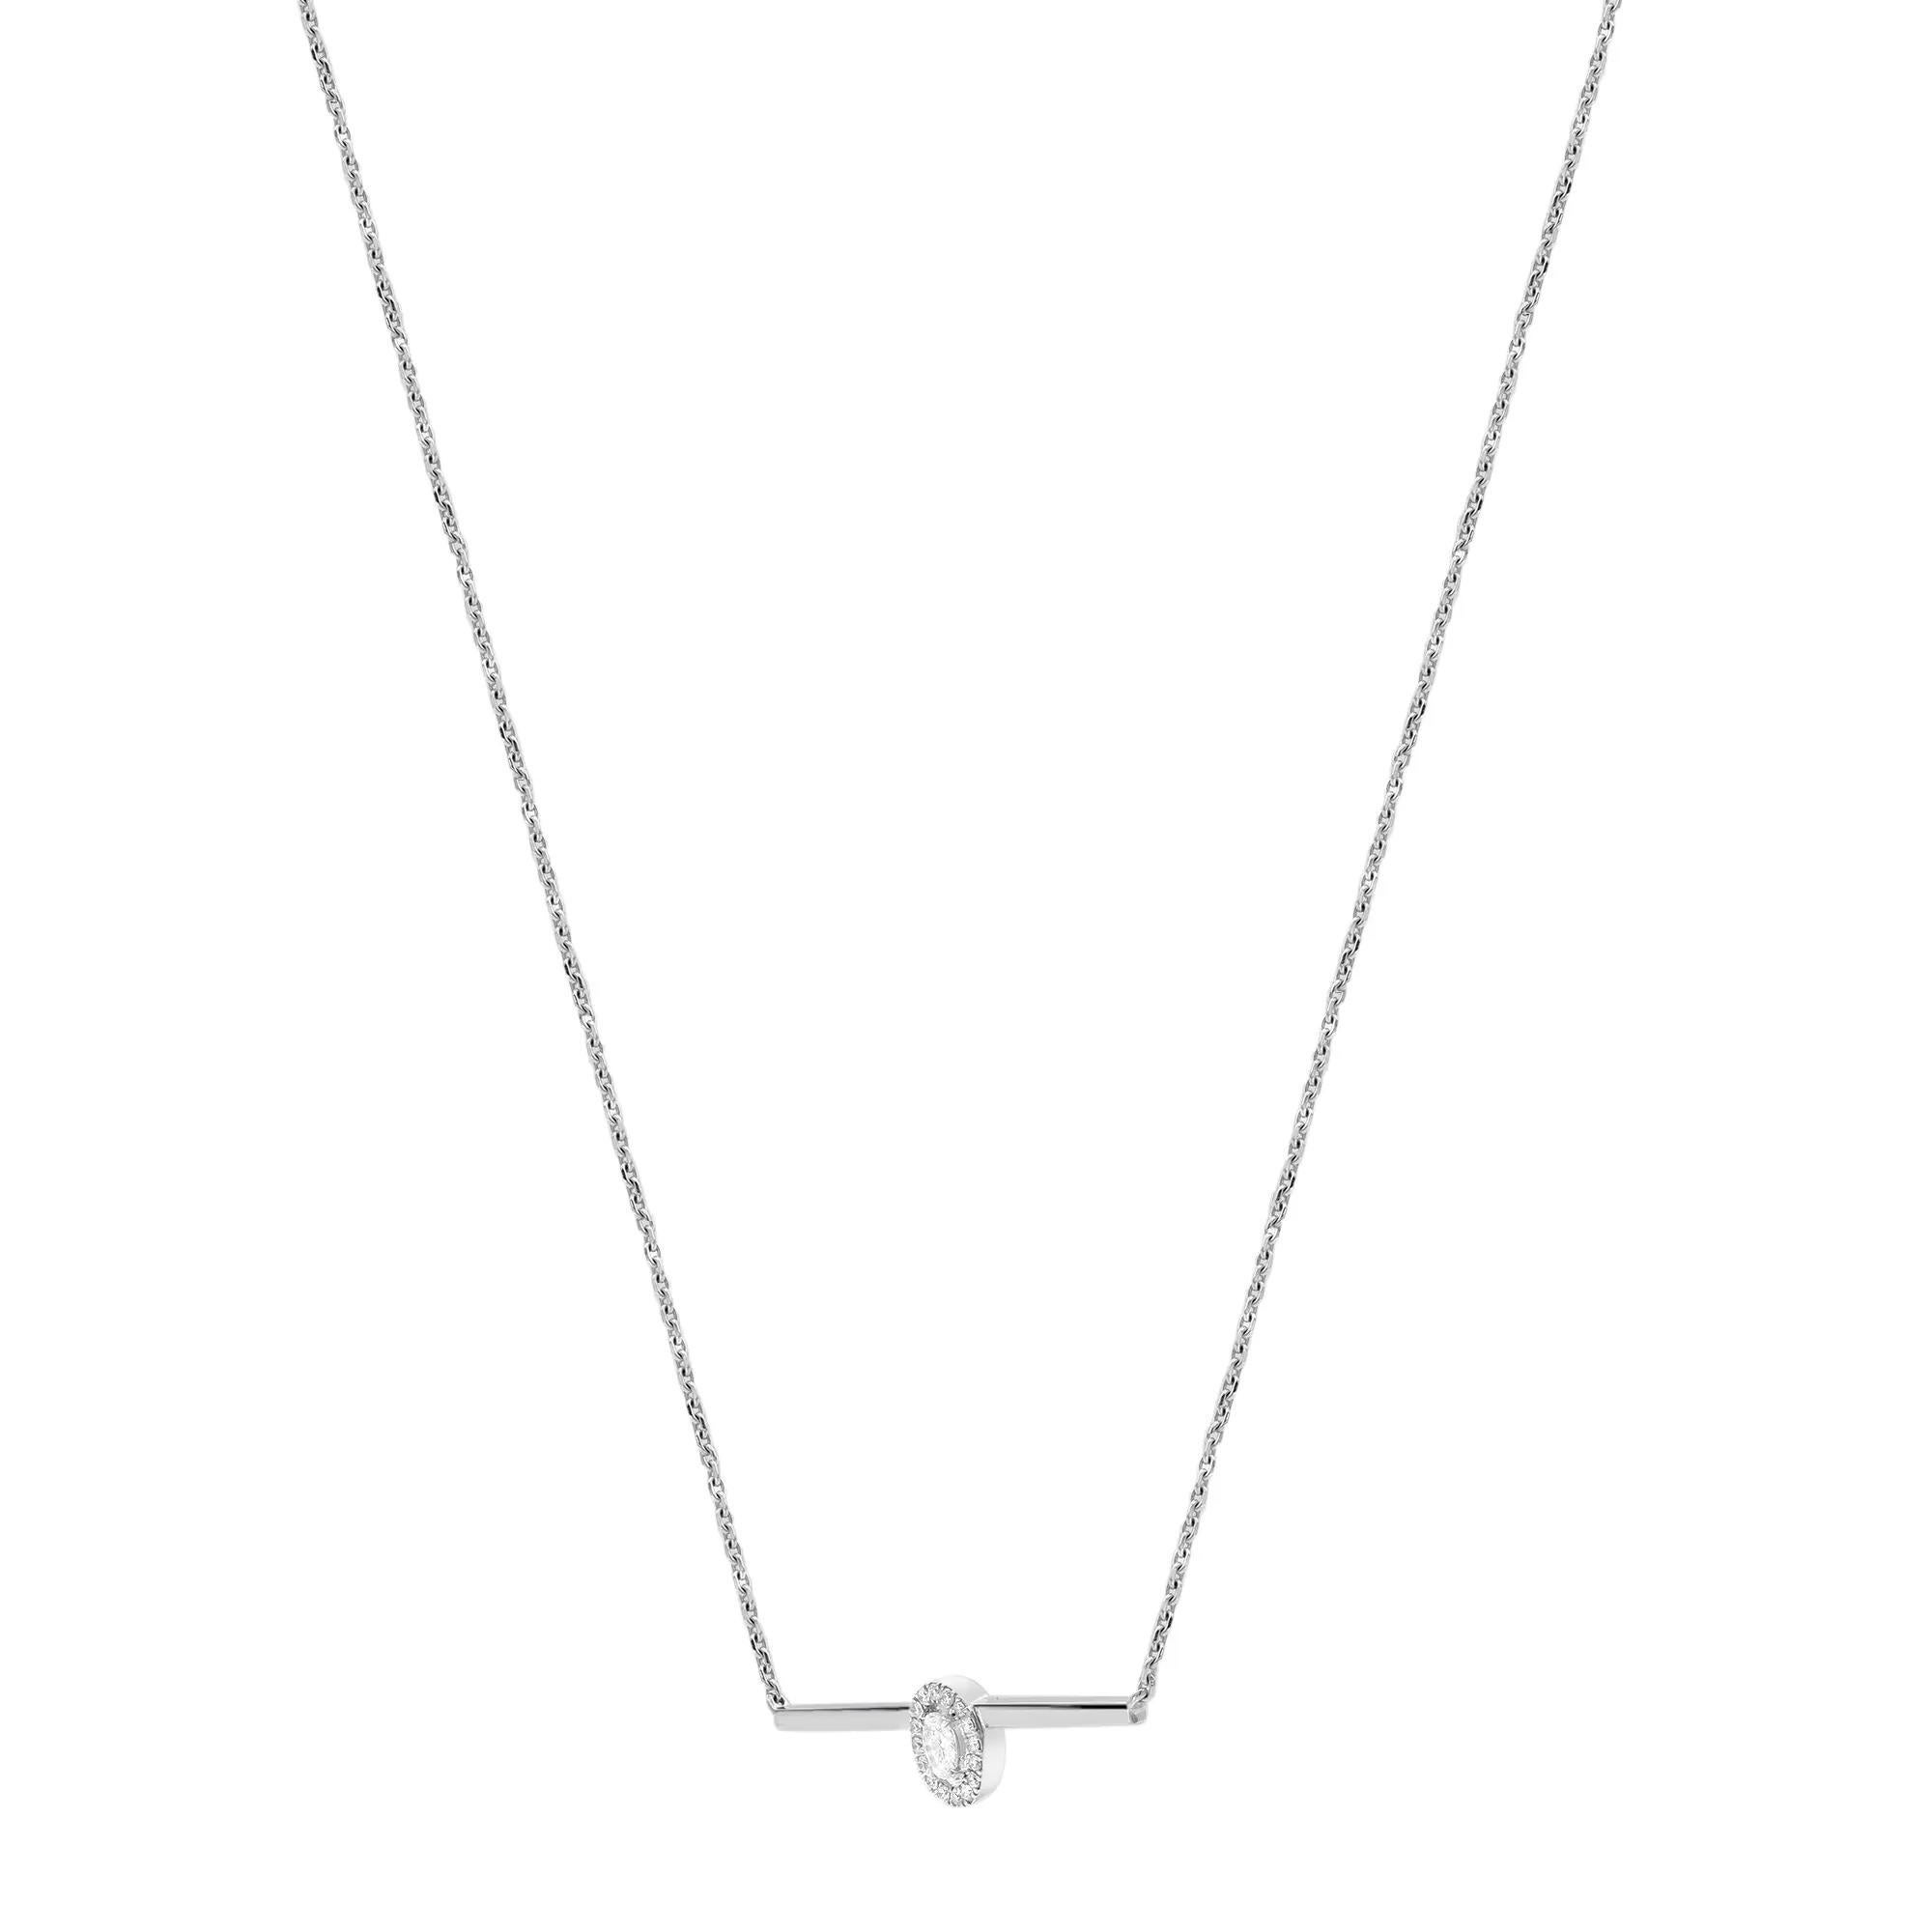 A chic and modern, Messika Glam'Azone diamond bar necklace crafted in lustrous 18K white gold. Showcasing a center prong set oval cut diamond with a round cut halo bar chain necklace. Total diamond weight: 0.22 carat. Diamond color G and clarity VS.